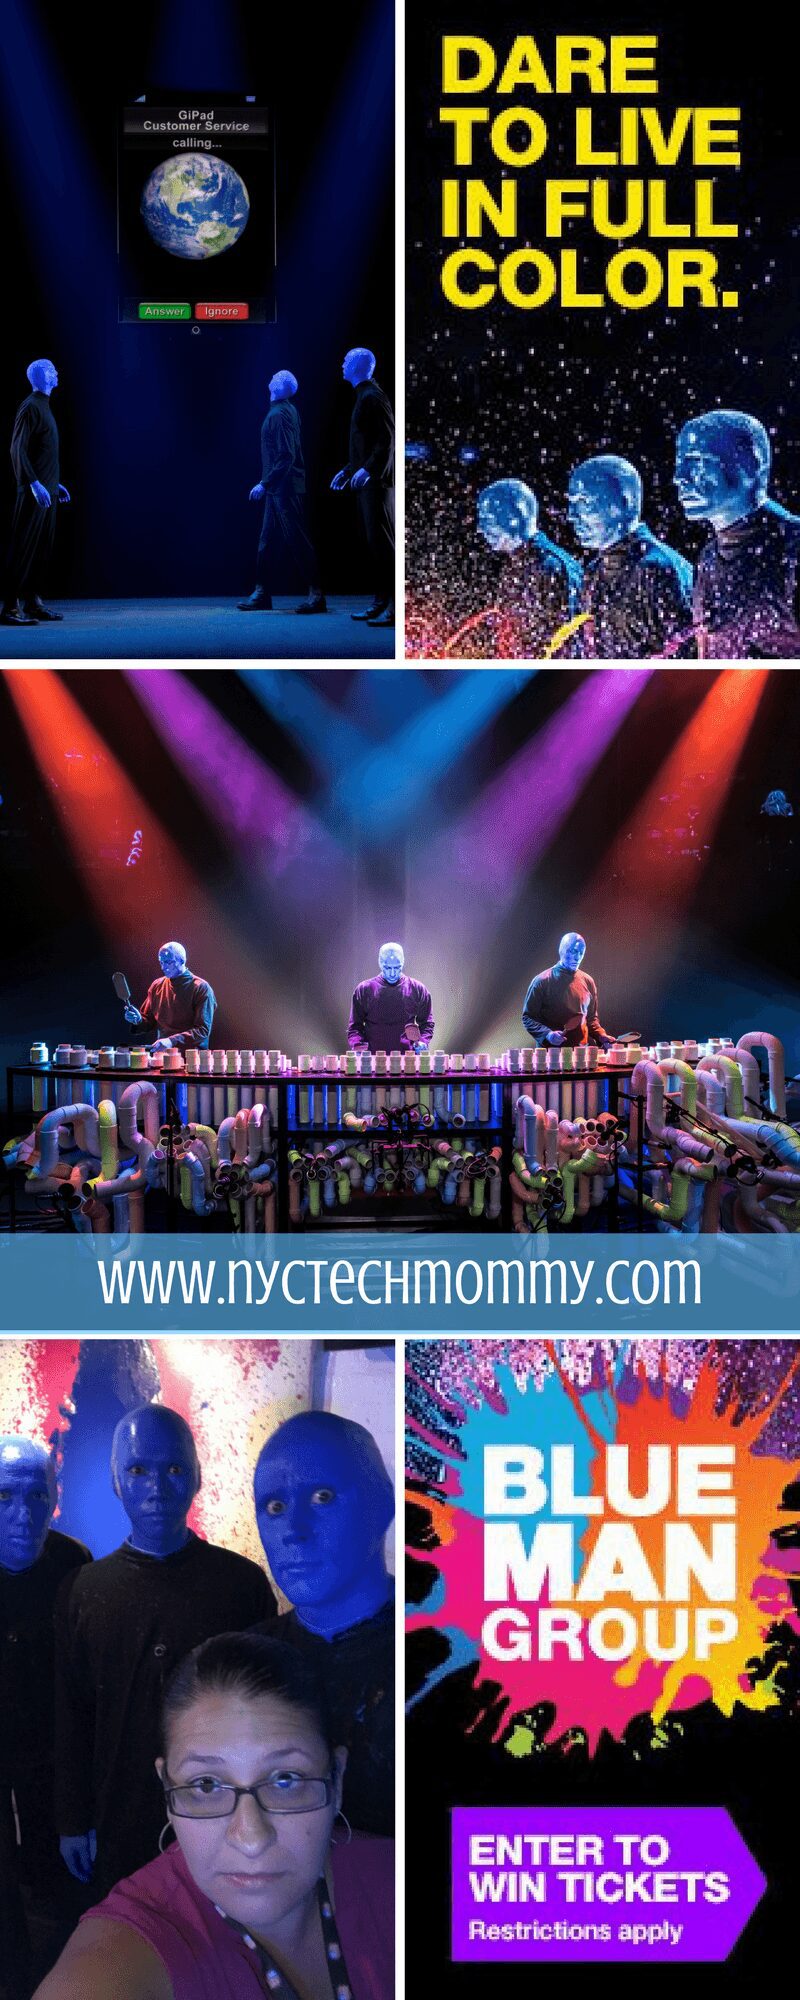 Blue Man Group Ticket Giveaway - Family Four (4) Pack of tickets -- This wildly popular show delivers a joyful, multi-sensory experience that the entire family will enjoy!